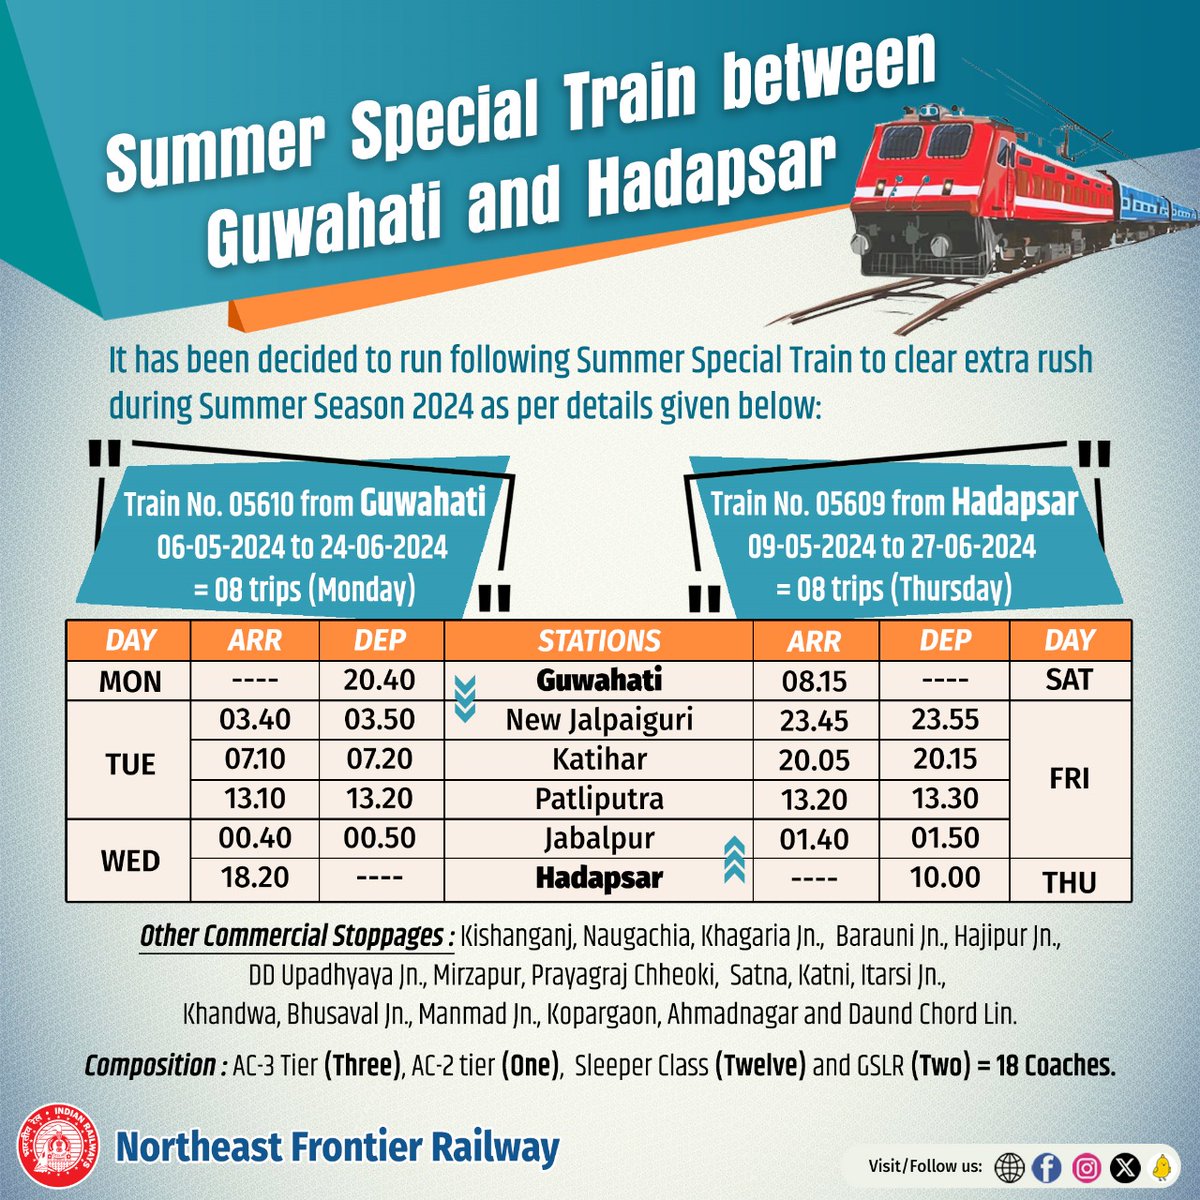 16 trips of Summer special trains between Guwahati and Hadapsar to clear the rush of passengers travelling on that route